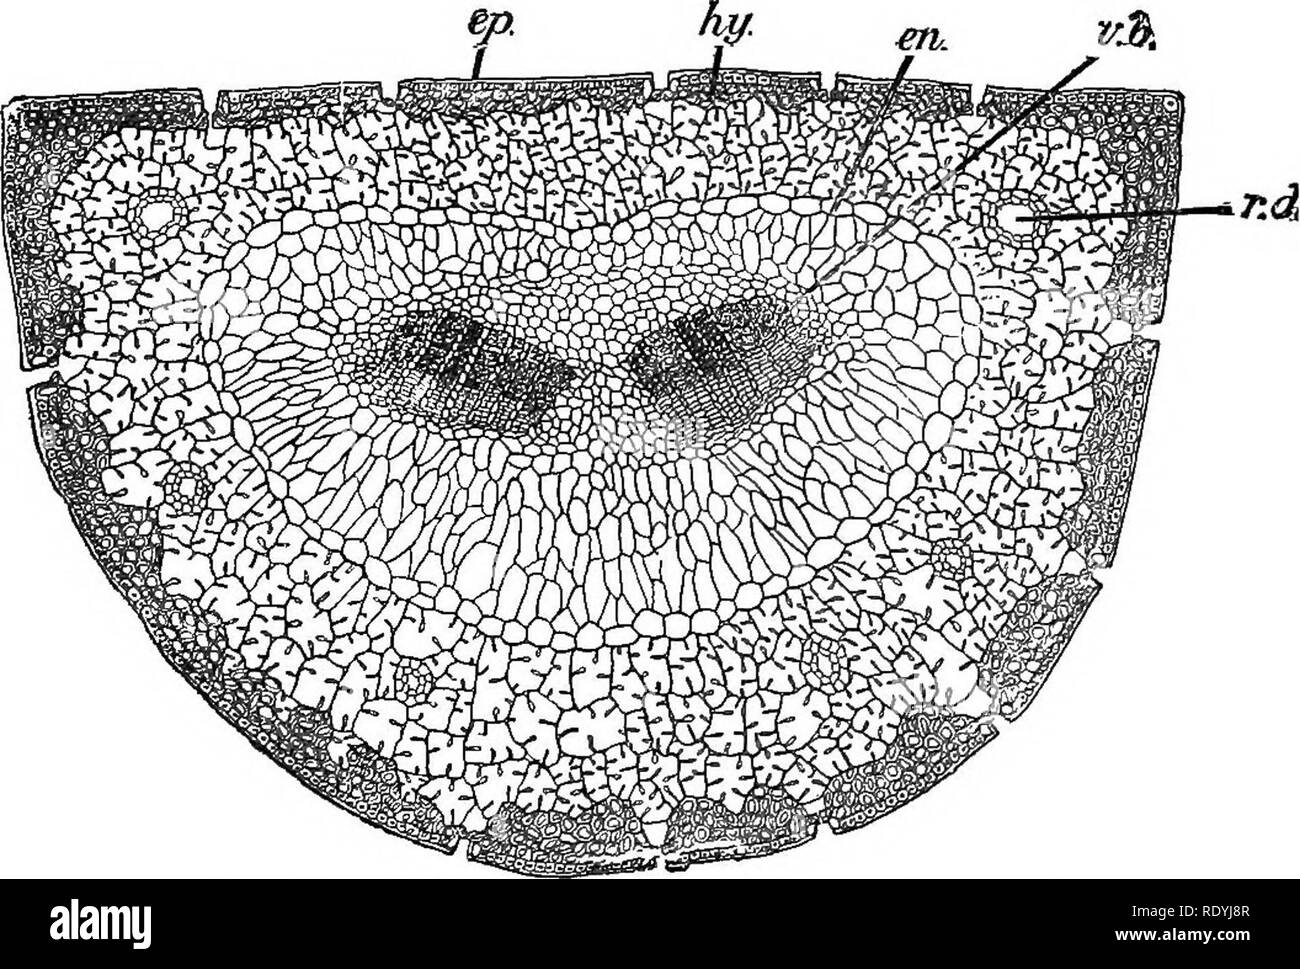 . An introduction to vegetable physiology. Plant physiology. THE DIFEEKENTIATION OP THE PLANT-BODY 27 (fig. 30); the vascular bundles of many Monocotyledons are surrounded separately by a sheath of small cells of similar character (fig. 31); in Pennisetum (fig. 32, 4) a sheath is developed round the stem in the form of a hollow cylinder which lies between the bundles and the epidermis. More frequent instances occur in which two of the regions in question are strengthened simultaneously. In the stems of Scirpus (fig. 32, 5) there is a development of sclerenchyma round the periphery, and strands Stock Photo